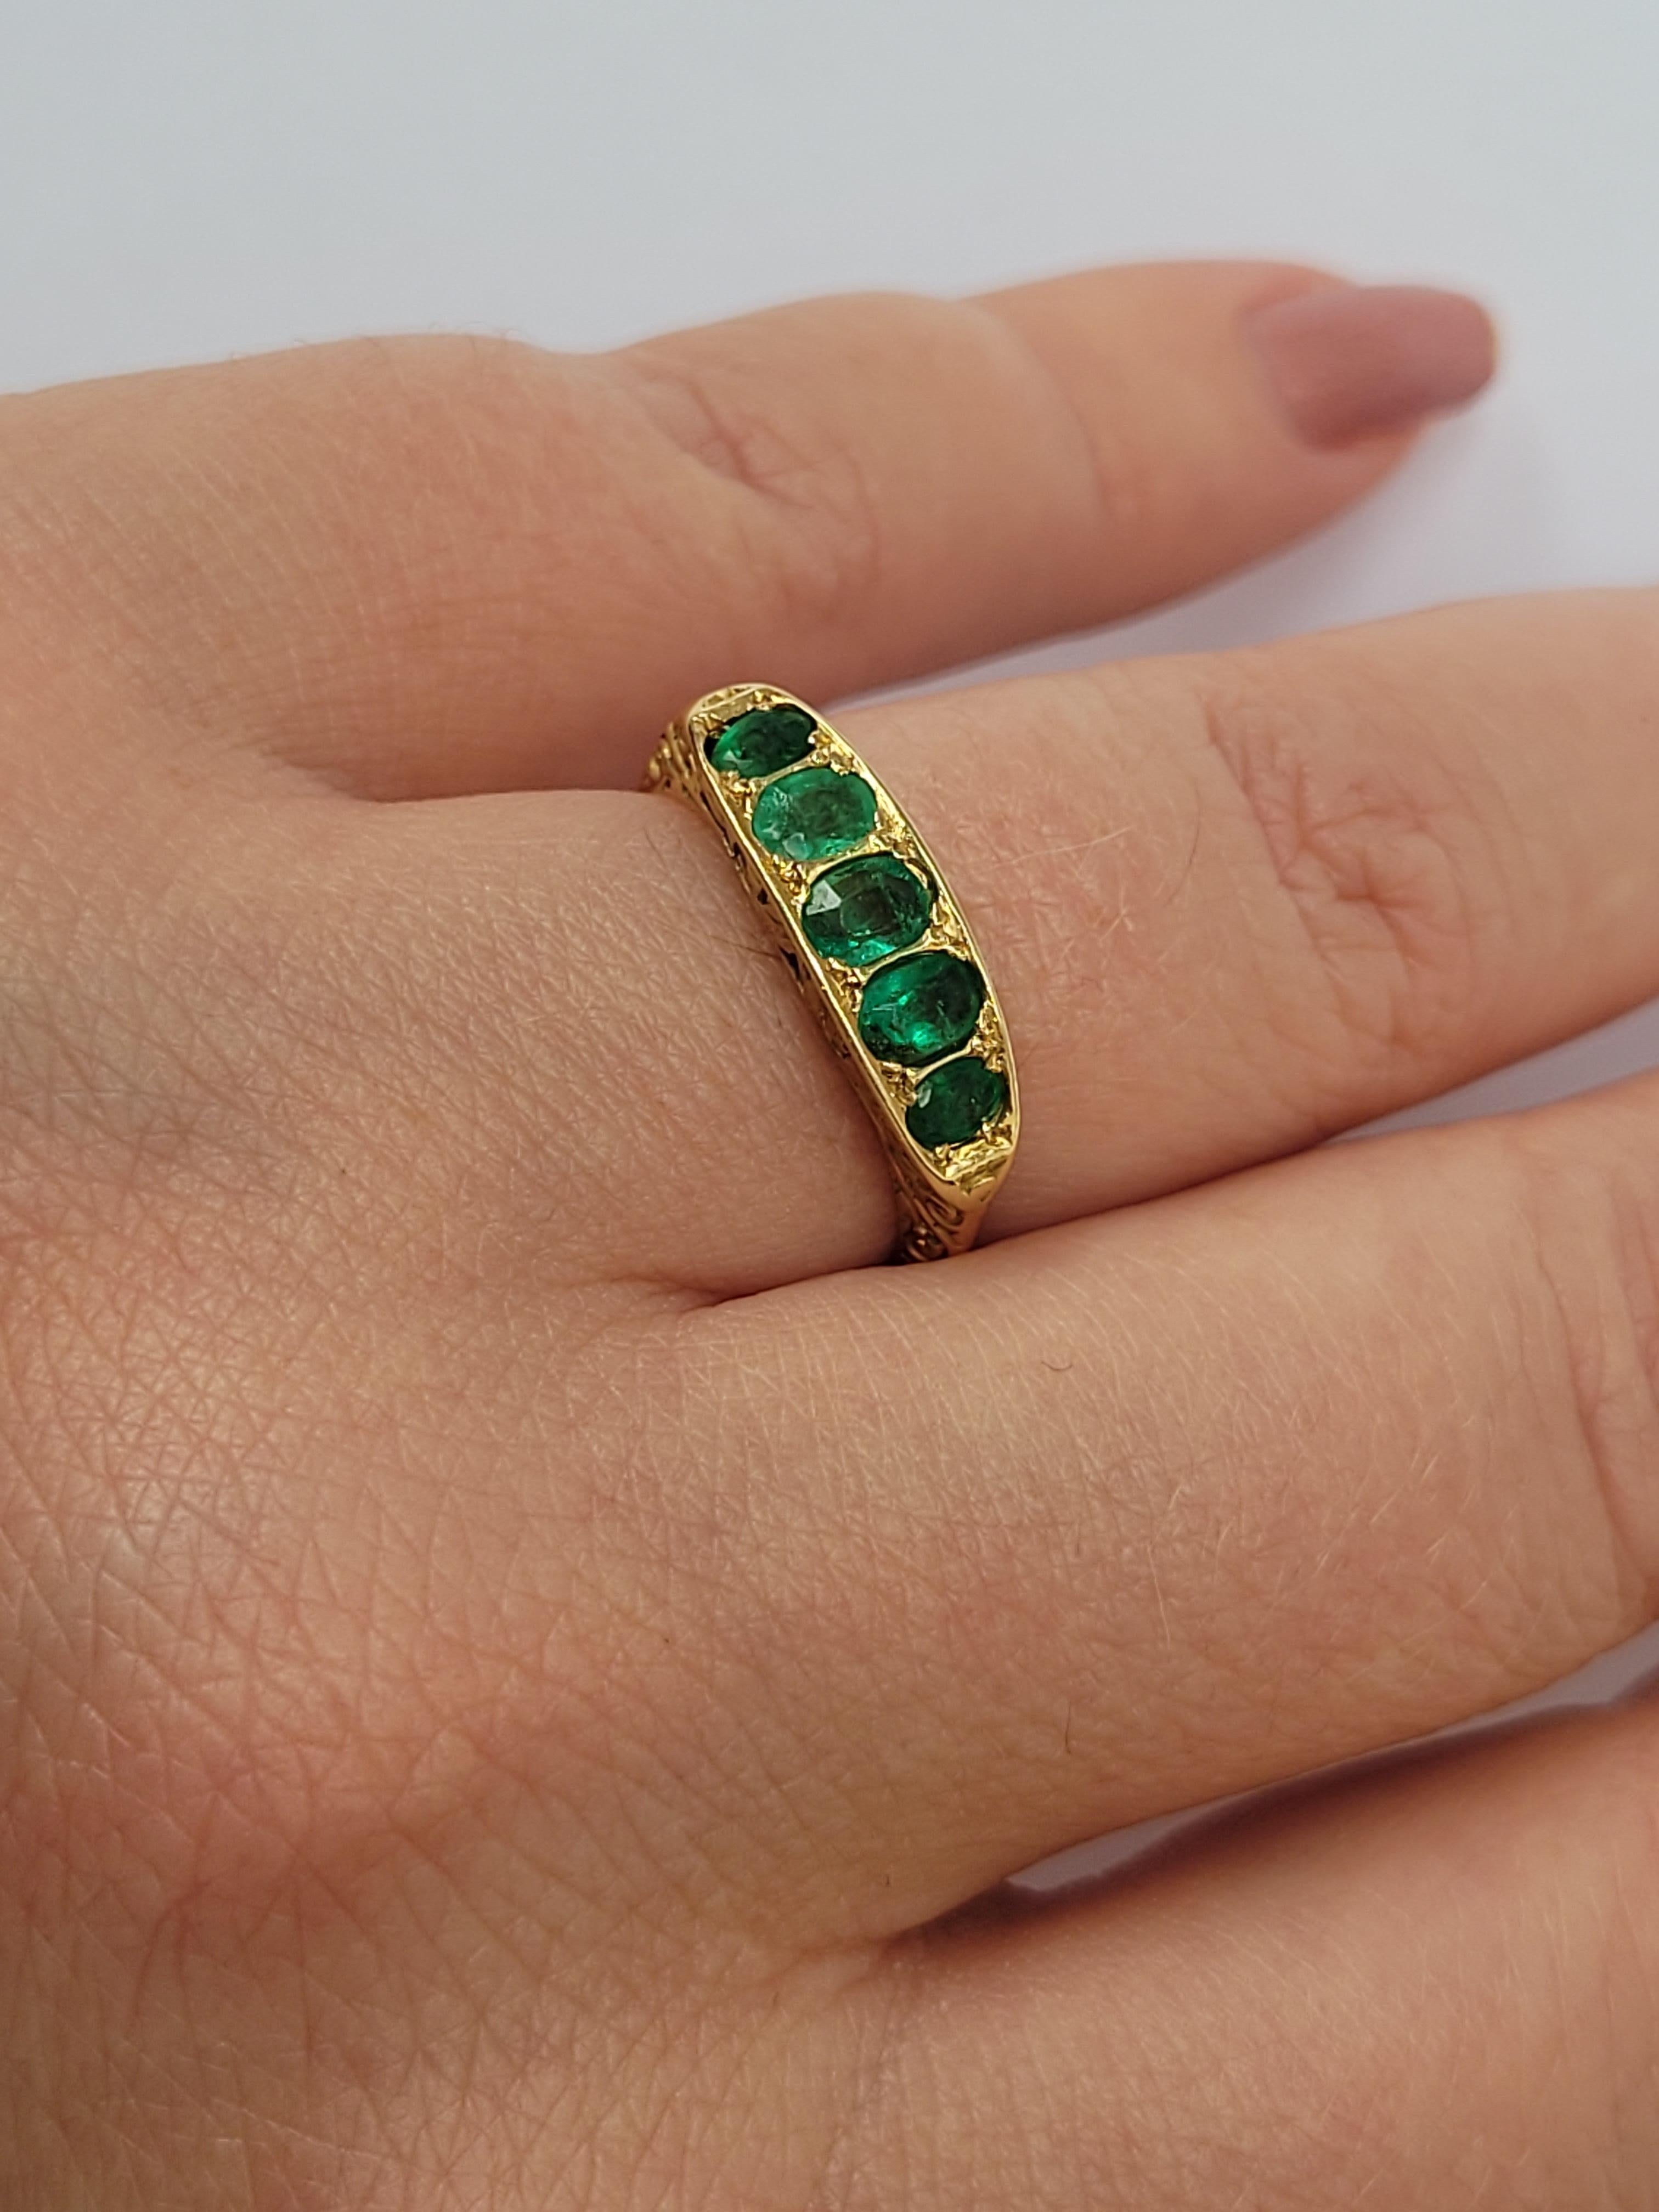 A lovely antique Victorian 18 Karat Gold and five Emerald ring. The stones in beautiful setting. Perfect as everyday ring or gift for someone special. English origin. 

Size M 1/2 UK, 6.75 US.
Height of the face 5mm.
Weight 4.2gr.
Marked 18CT for 18